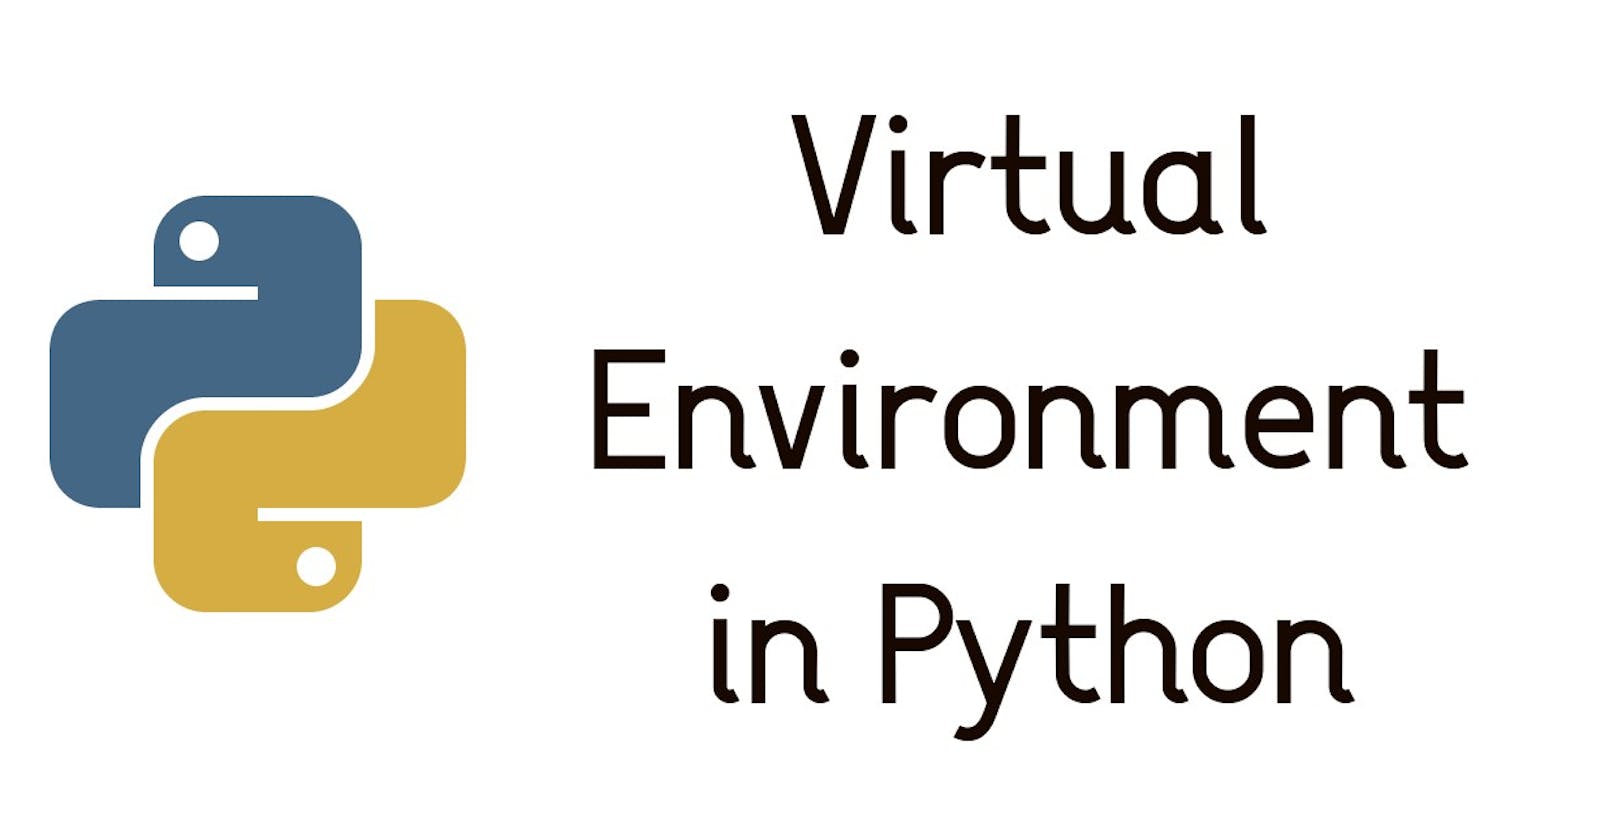 How to create virtual environment in Python